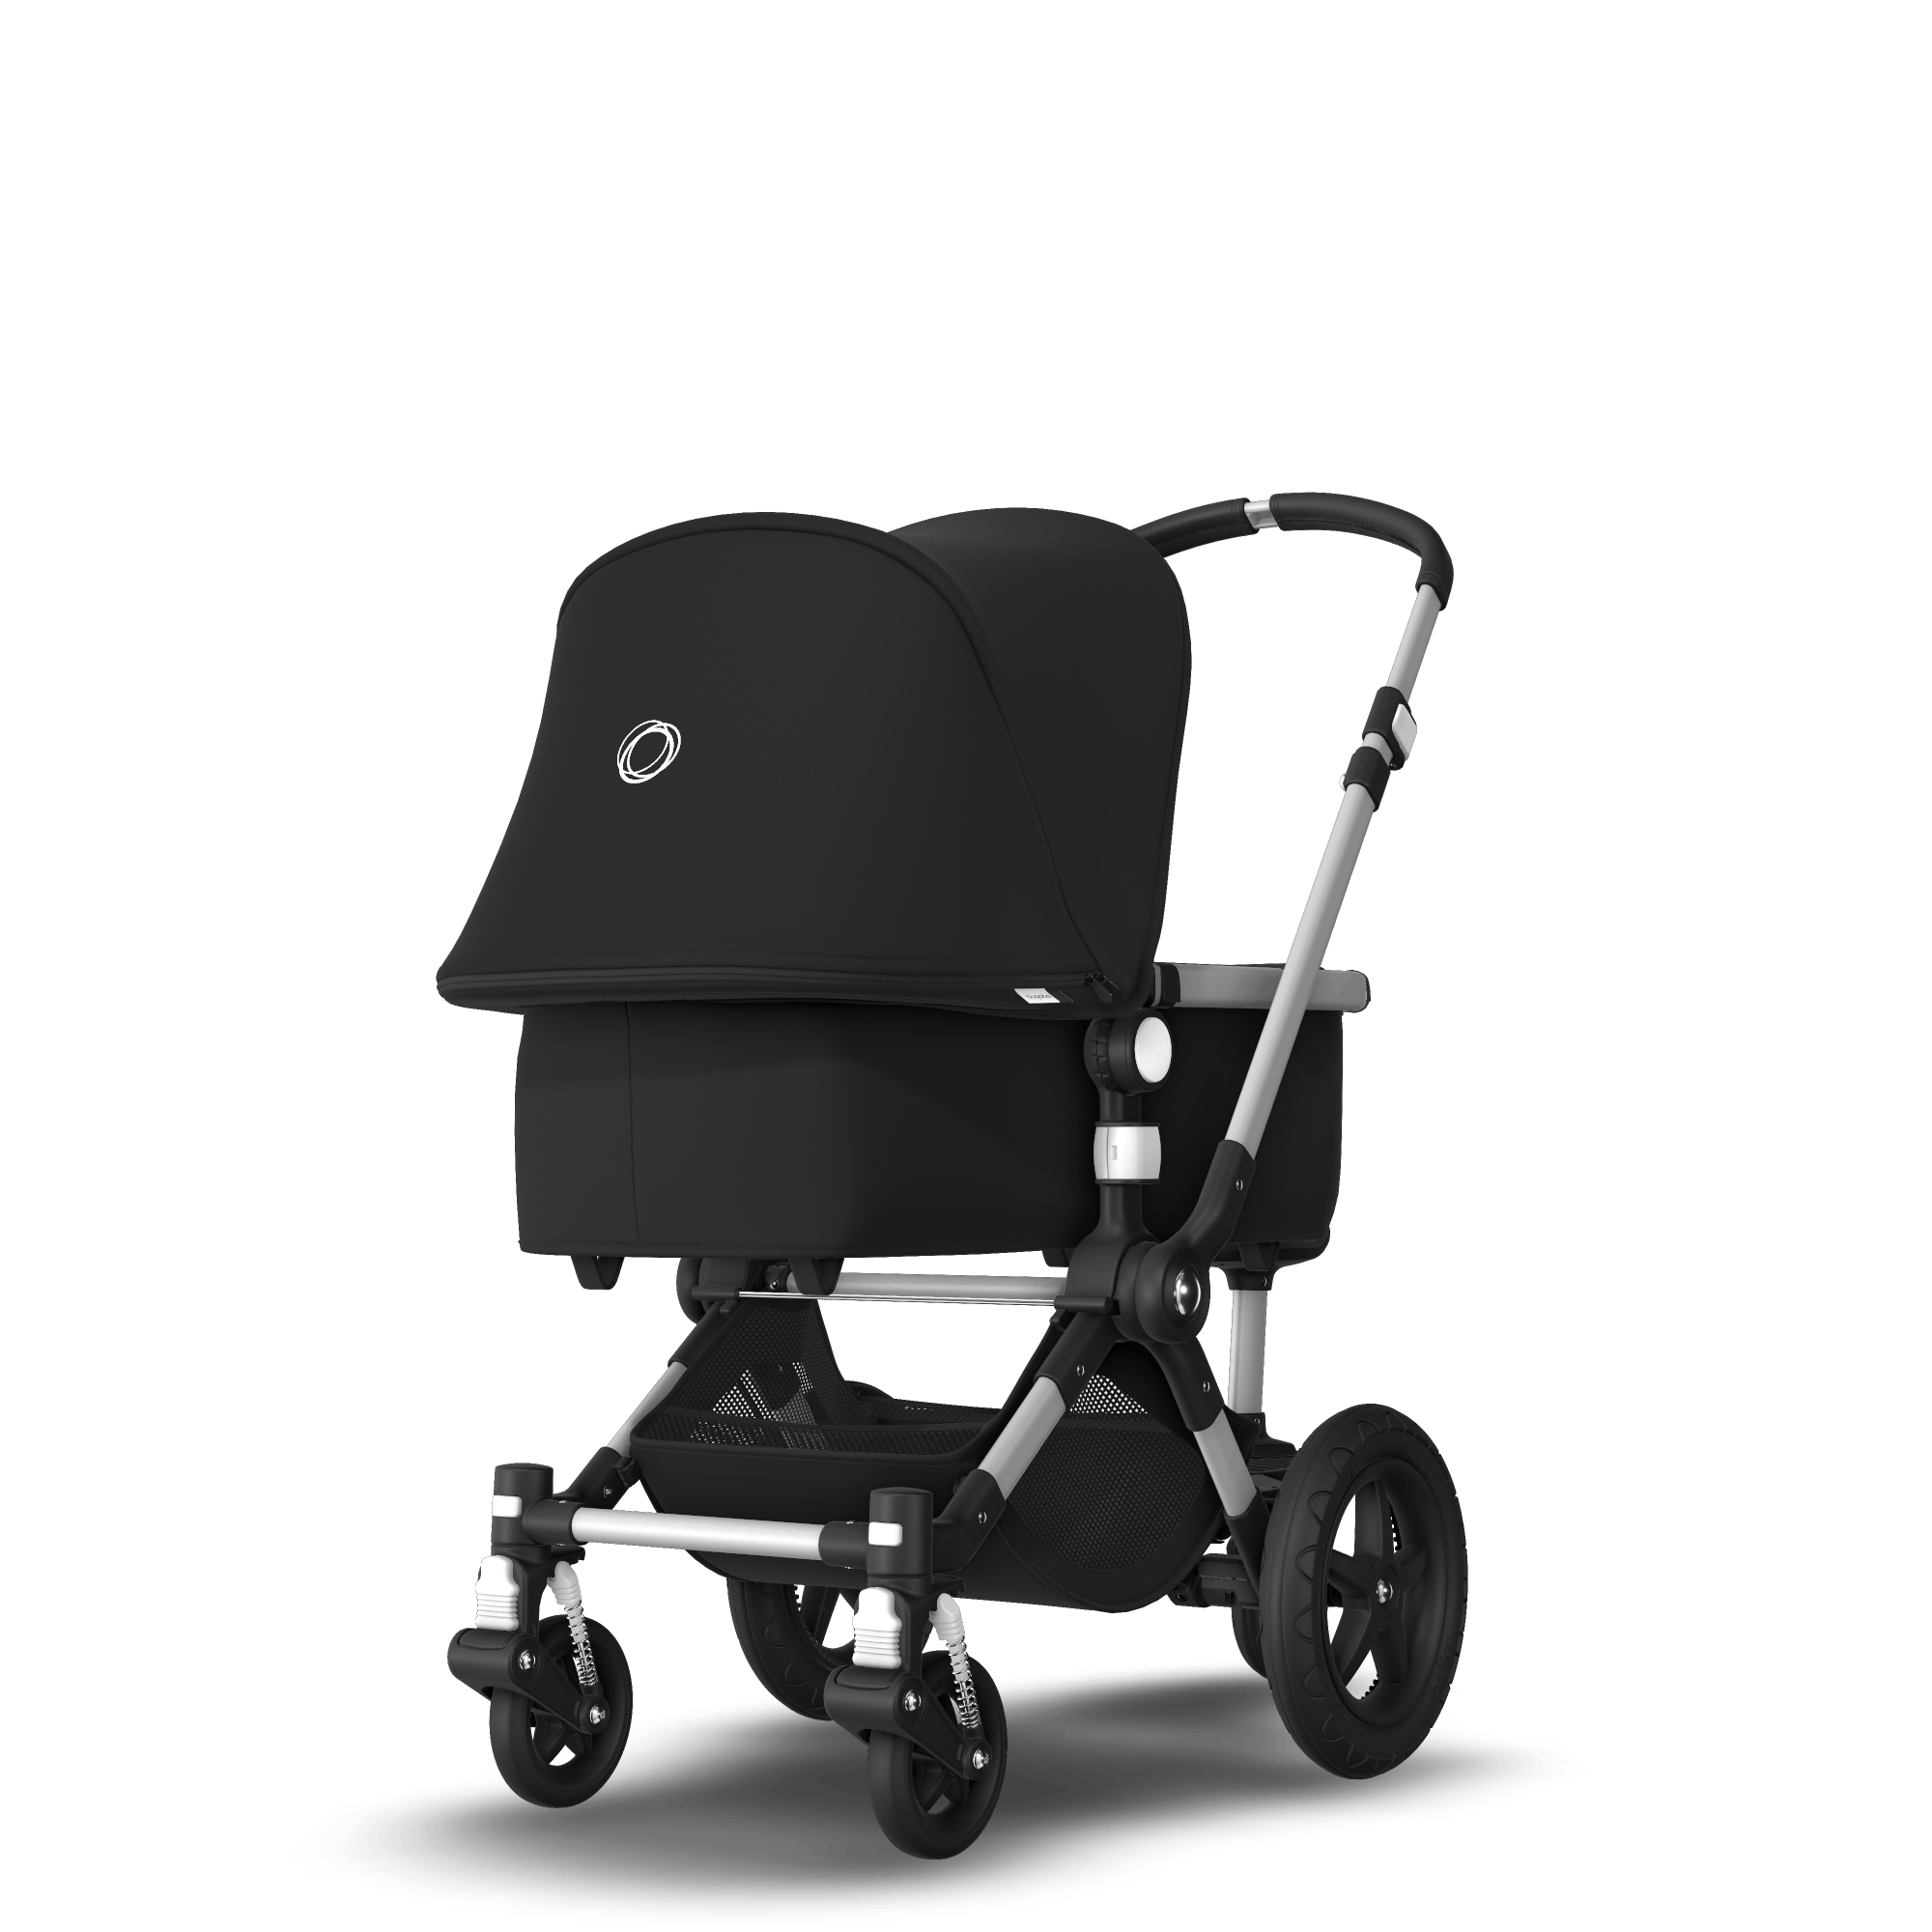 Bugaboo Trio Cameleon 3 Plus Stroller Grey Melange with Isofix Wingbase and  Turtle Air Car Seat Grey Melange - Adapters Included! unisex (bambini)